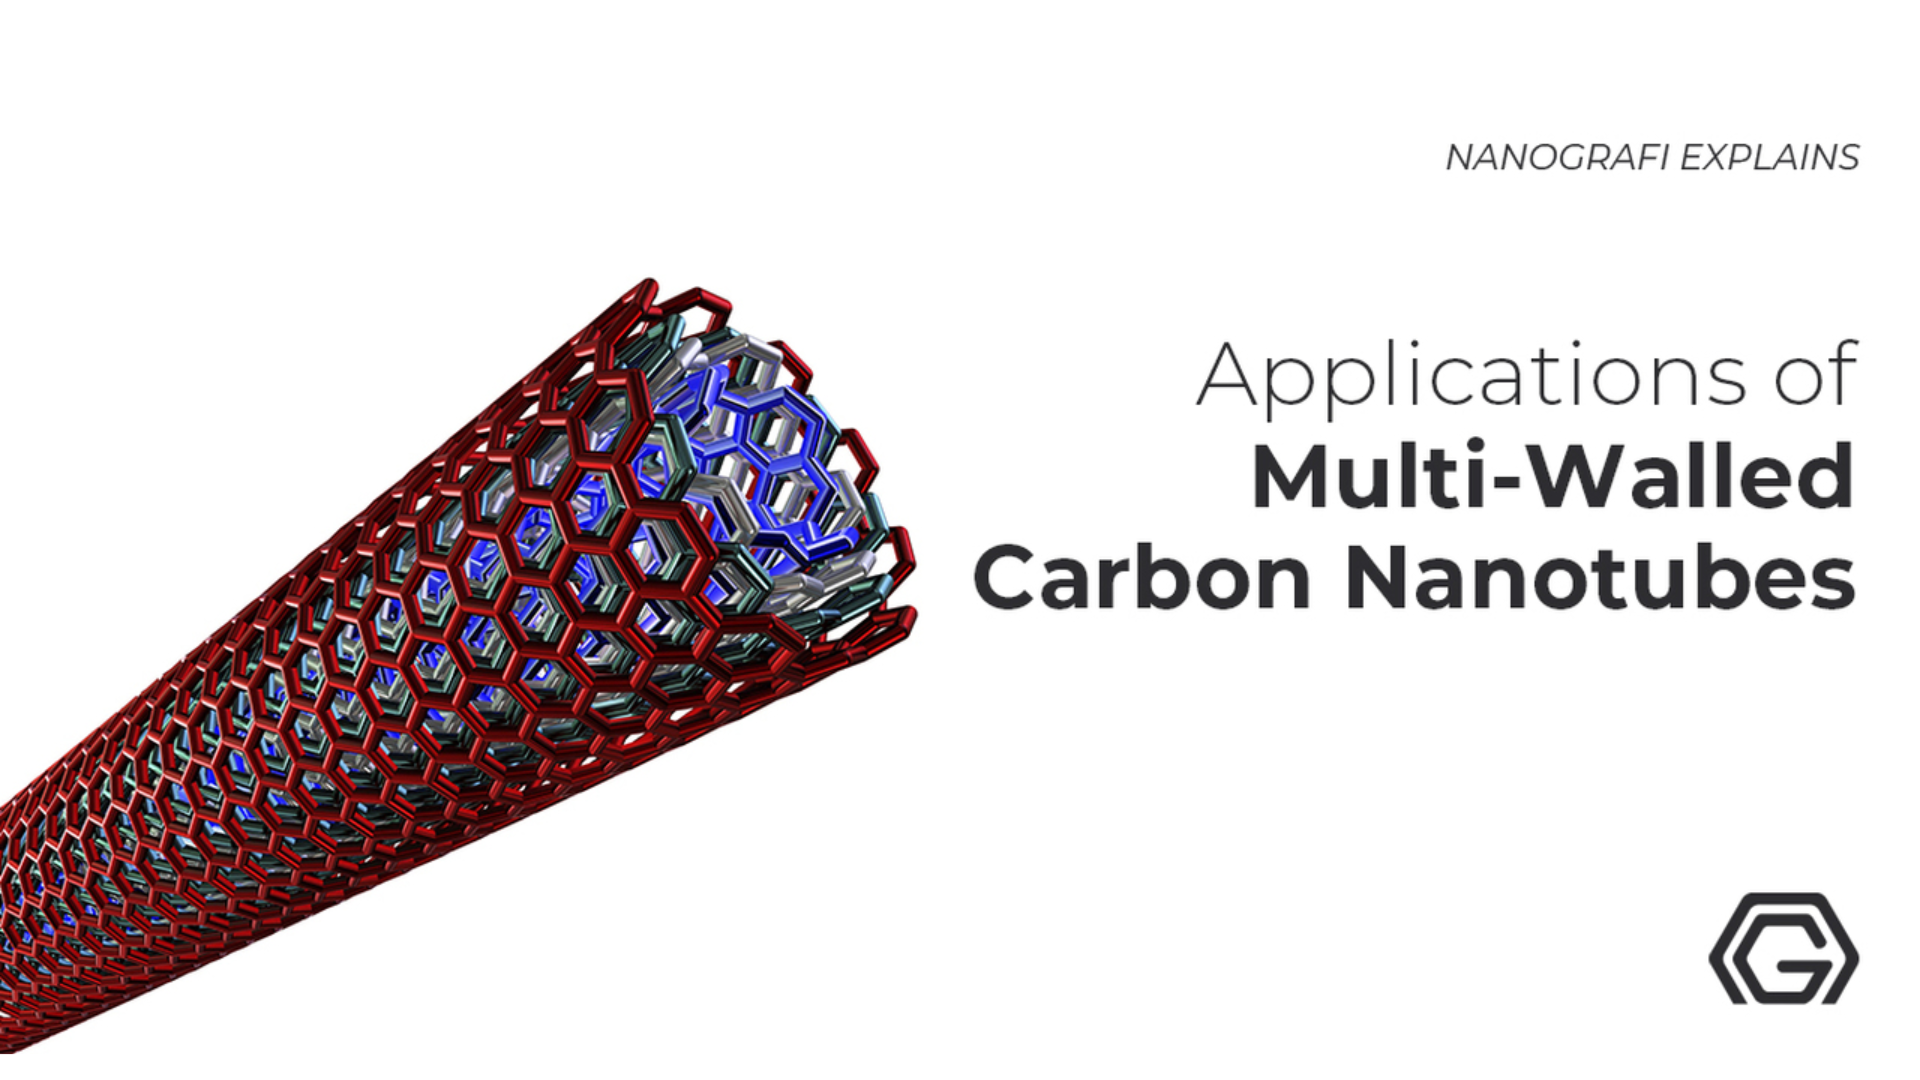 Applications of multi-walled carbon nanotubes